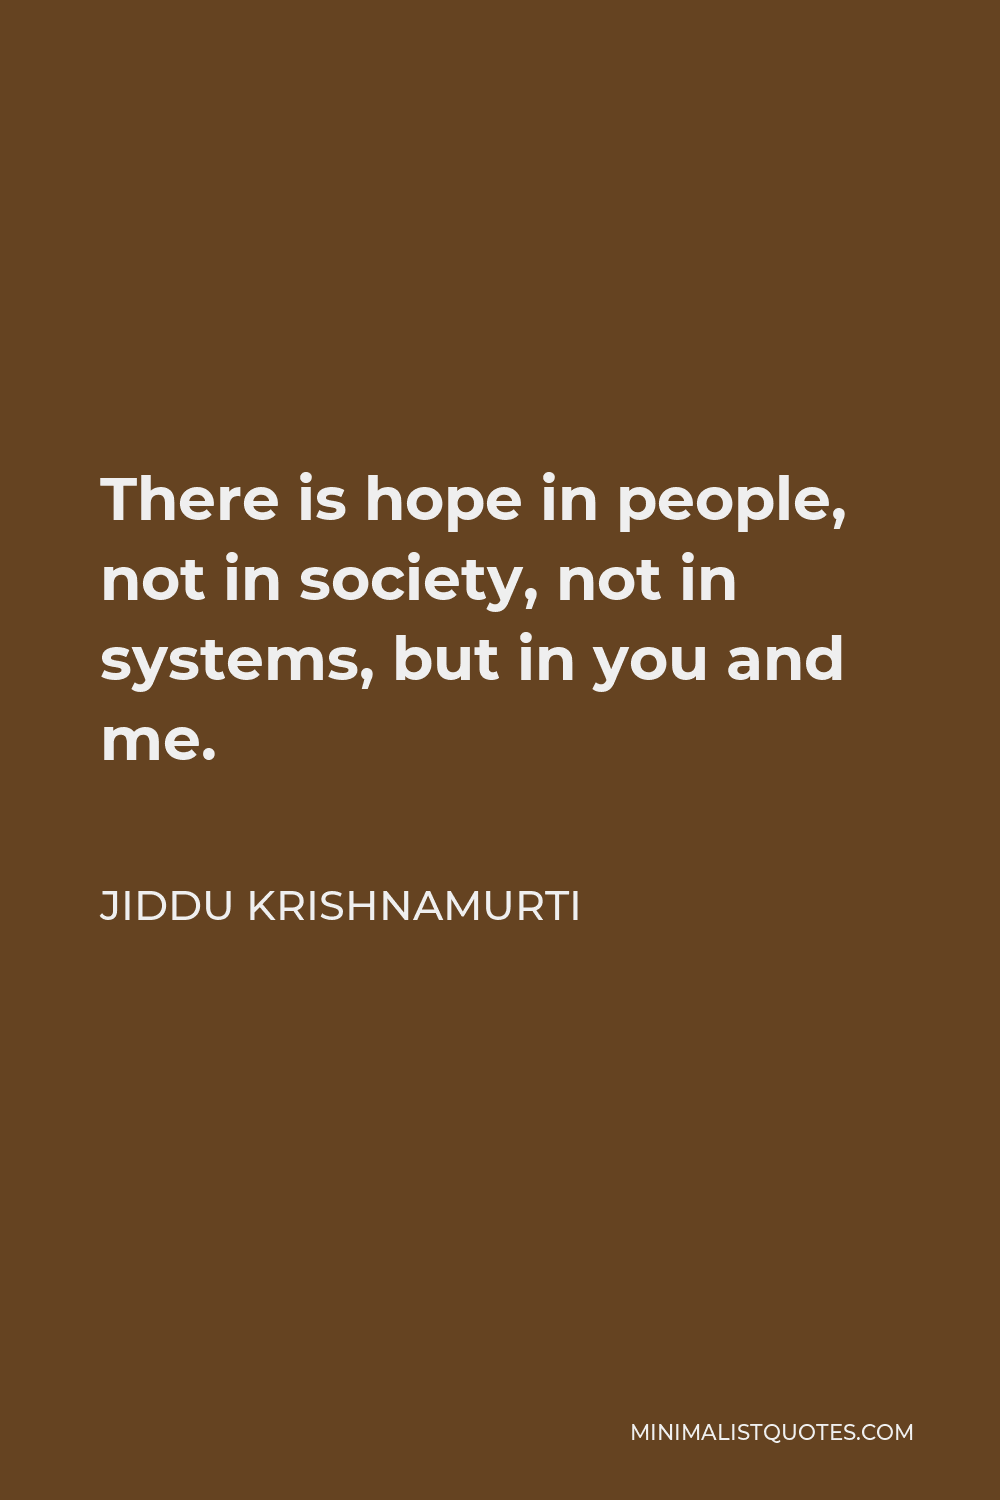 Jiddu Krishnamurti Quote - There is hope in people, not in society, not in systems, but in you and me.